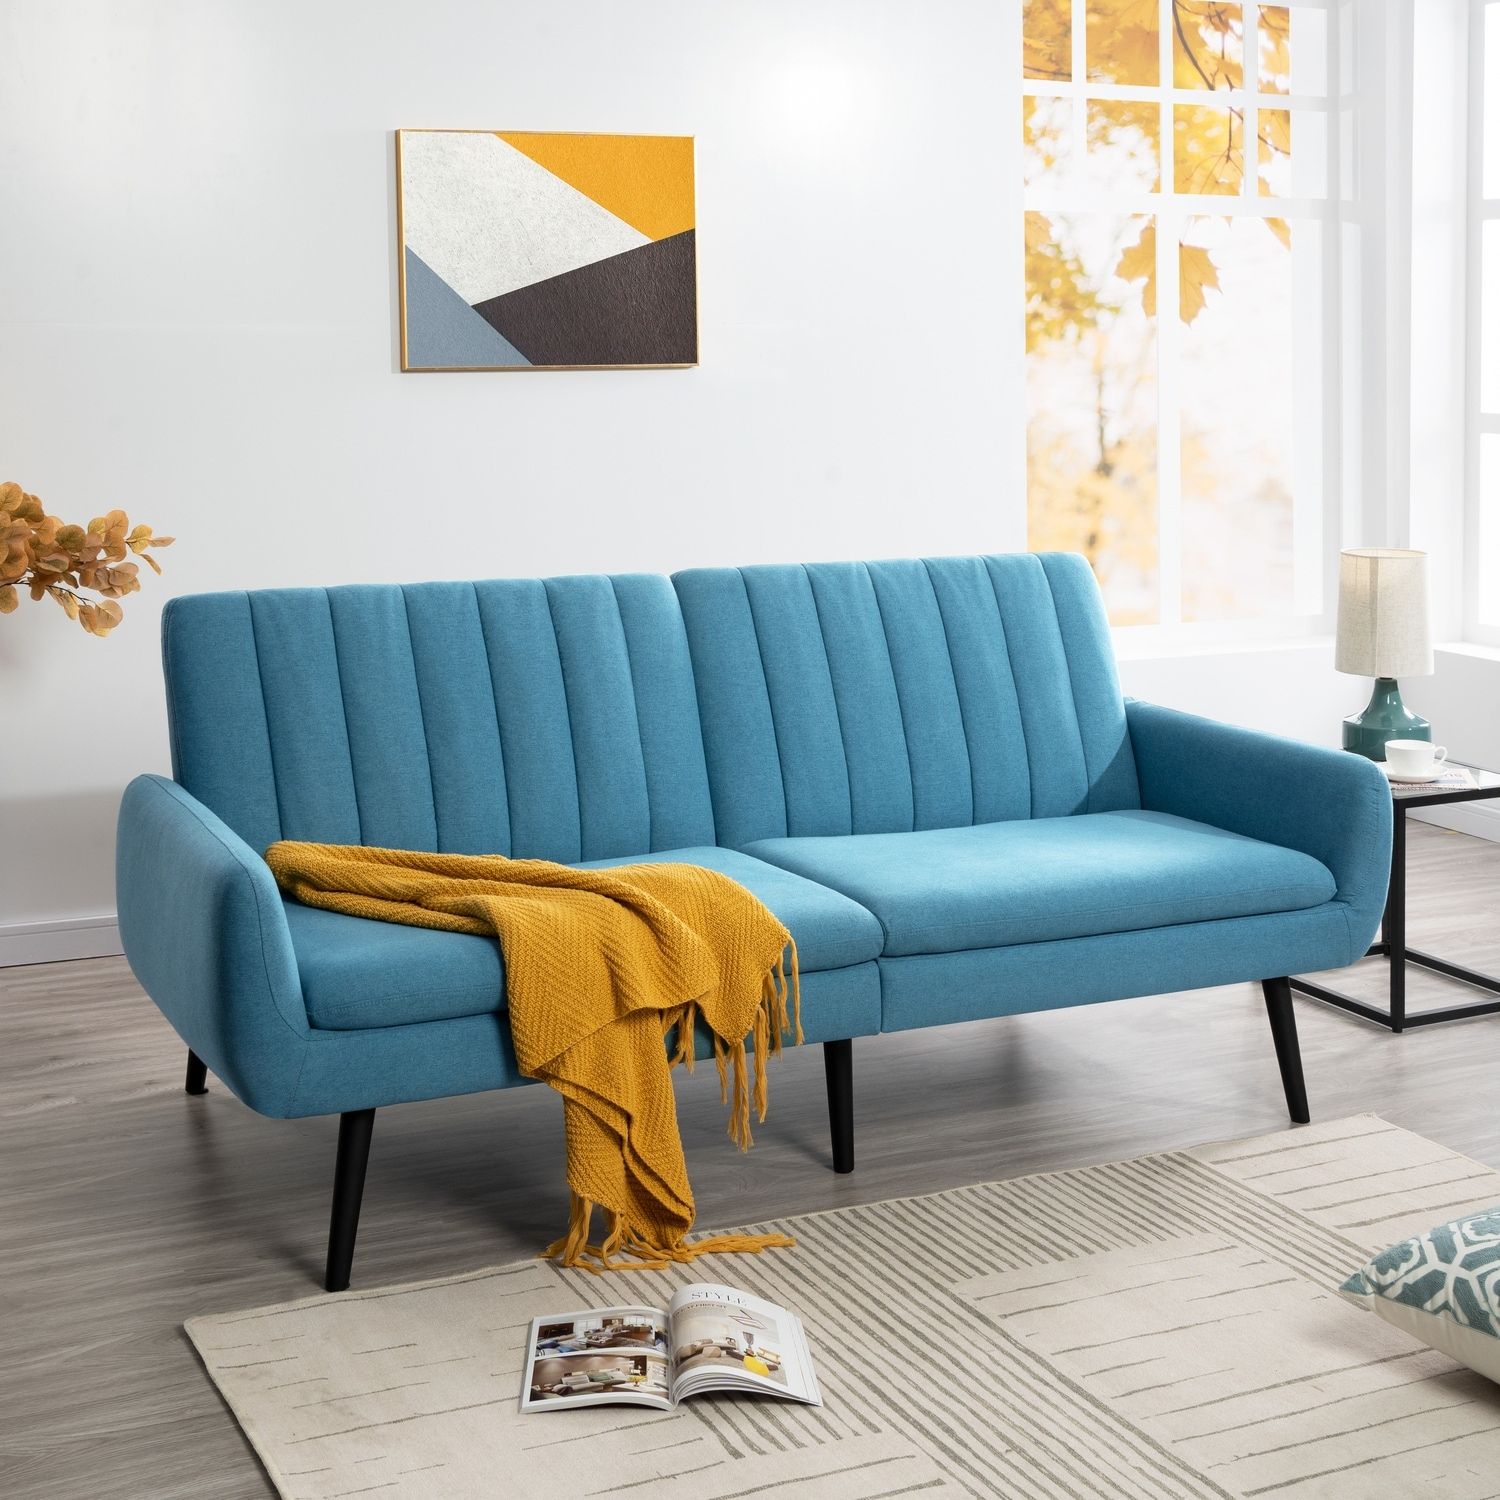 Raven Modern Futon Sofa Bed, Convertible Sofa Futon, Split Back Linen  Sleeper Couch For Living Room – On Sale – Bed Bath & Beyond – 38455072 Throughout Modern Blue Linen Sofas (View 8 of 15)